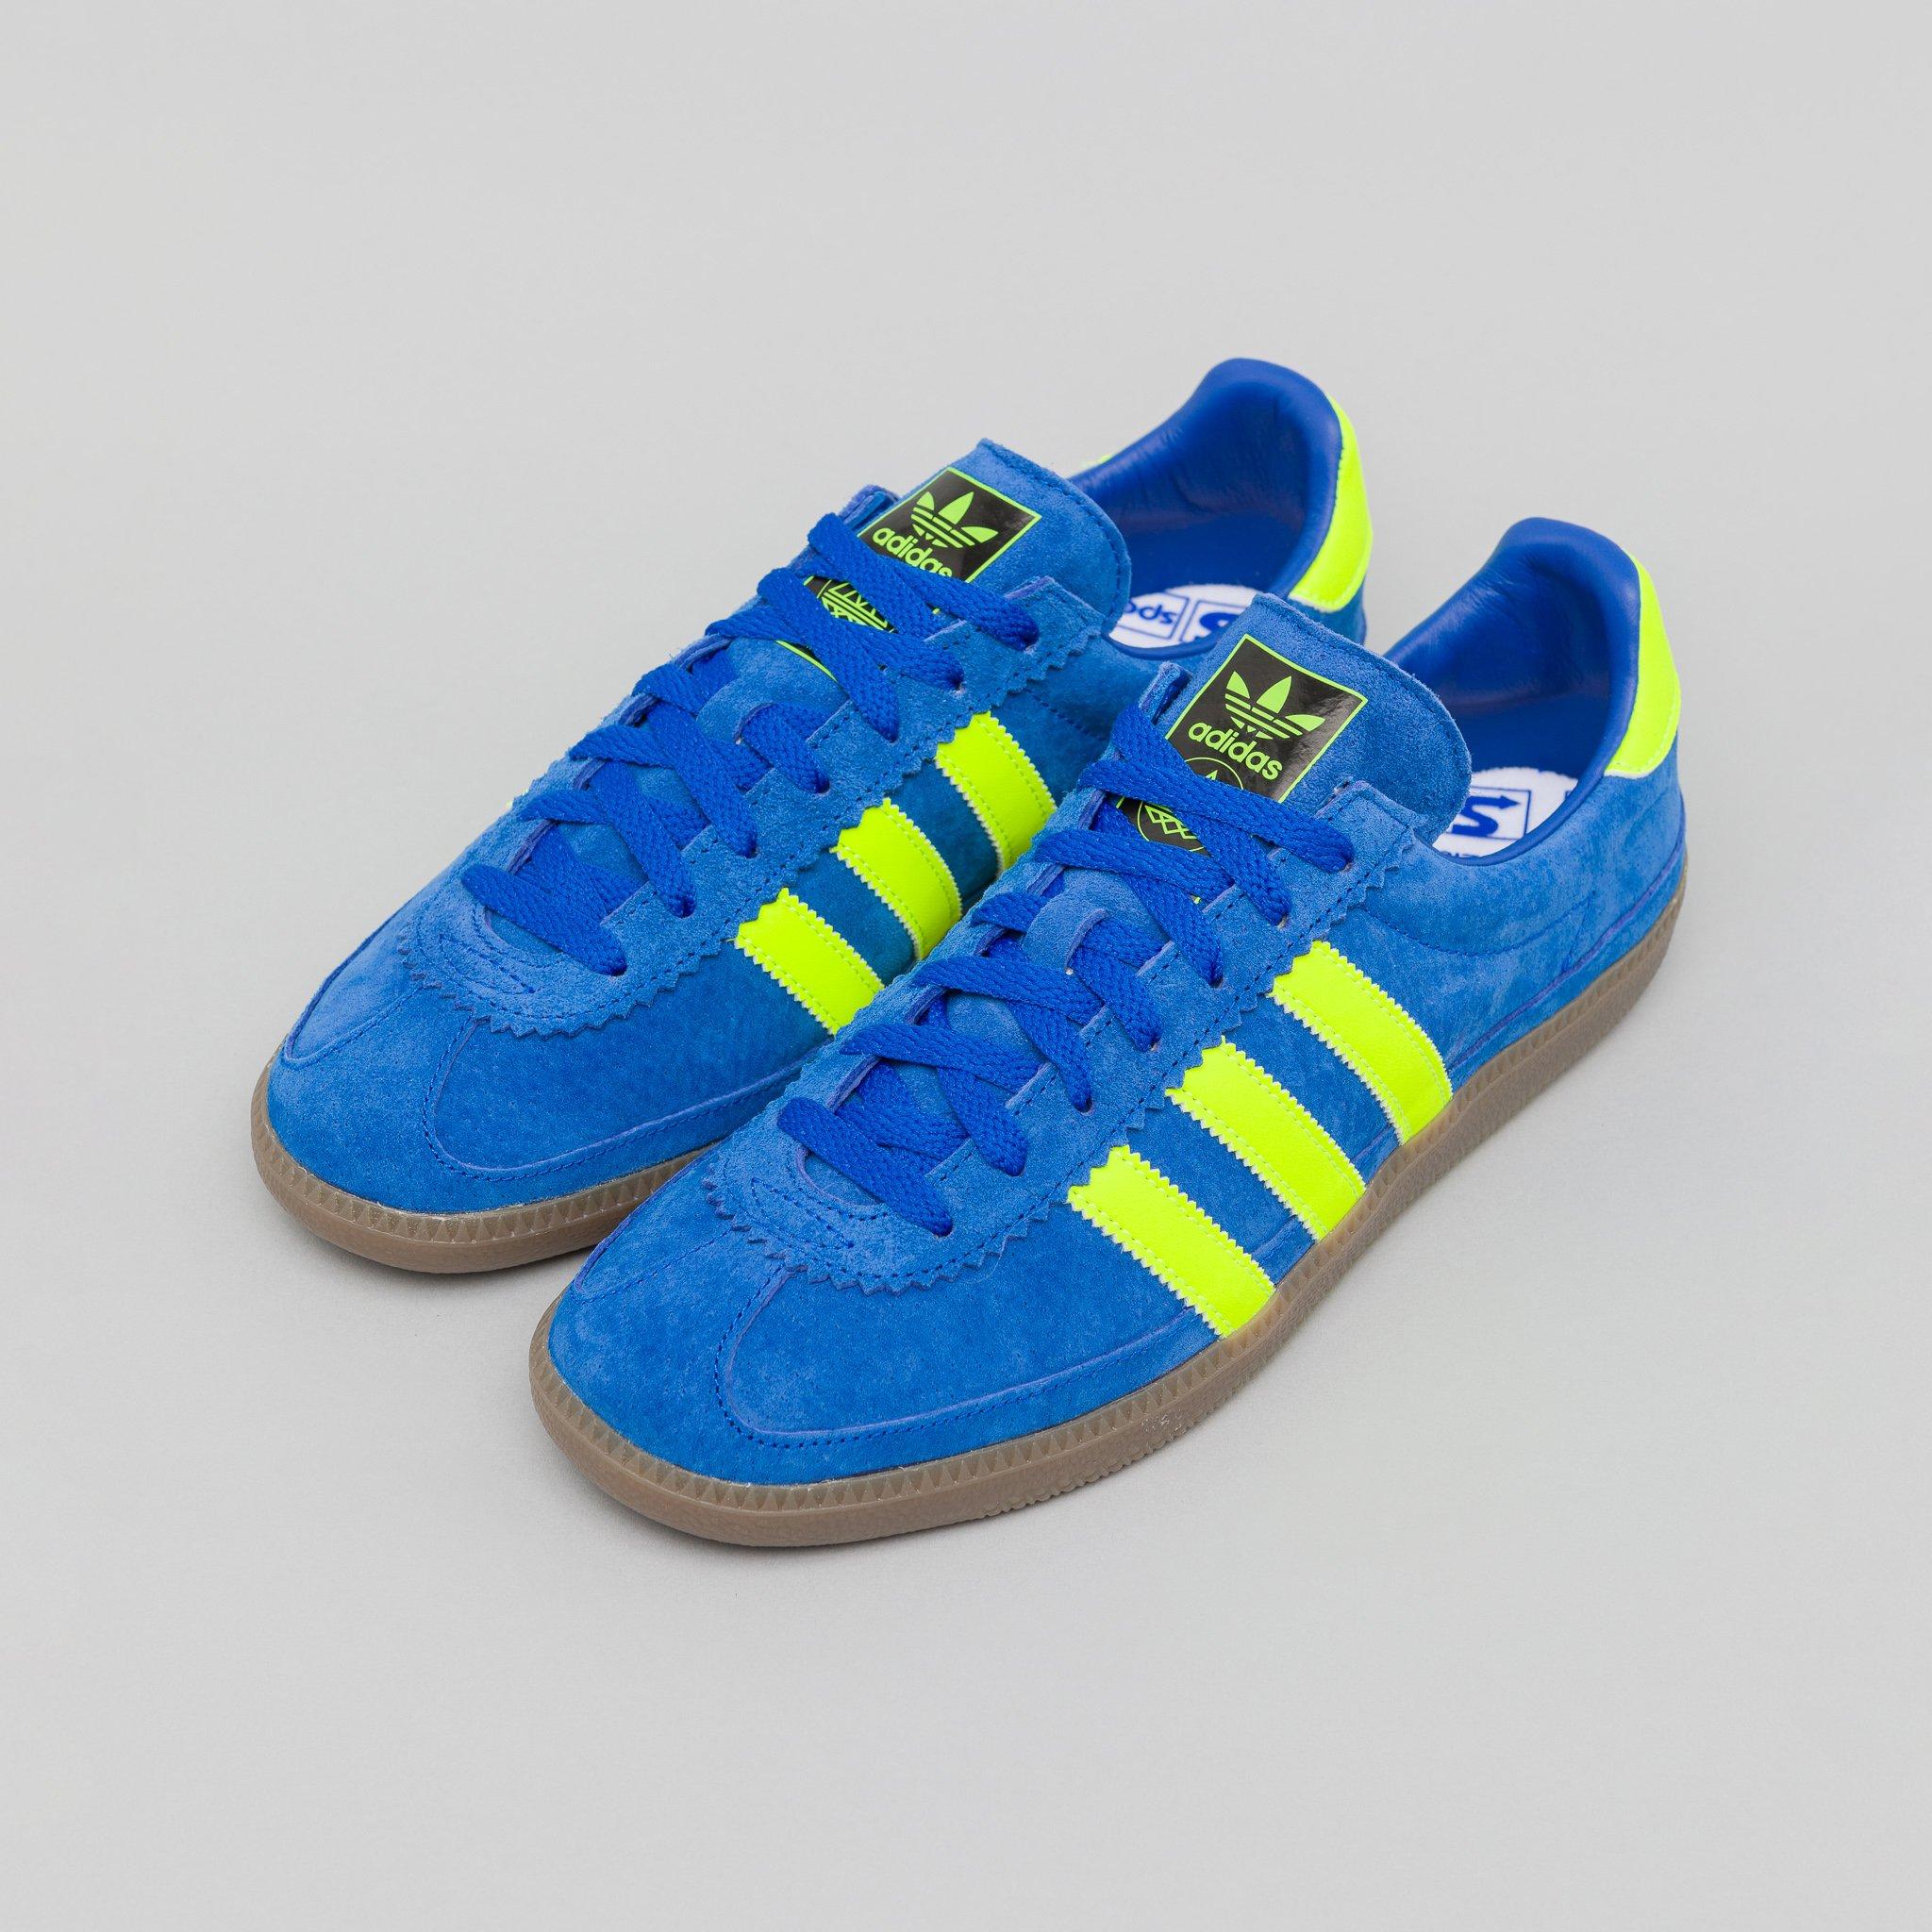 Adidas Whalley Blue Sale Online, SAVE 52% - aveclumiere.com